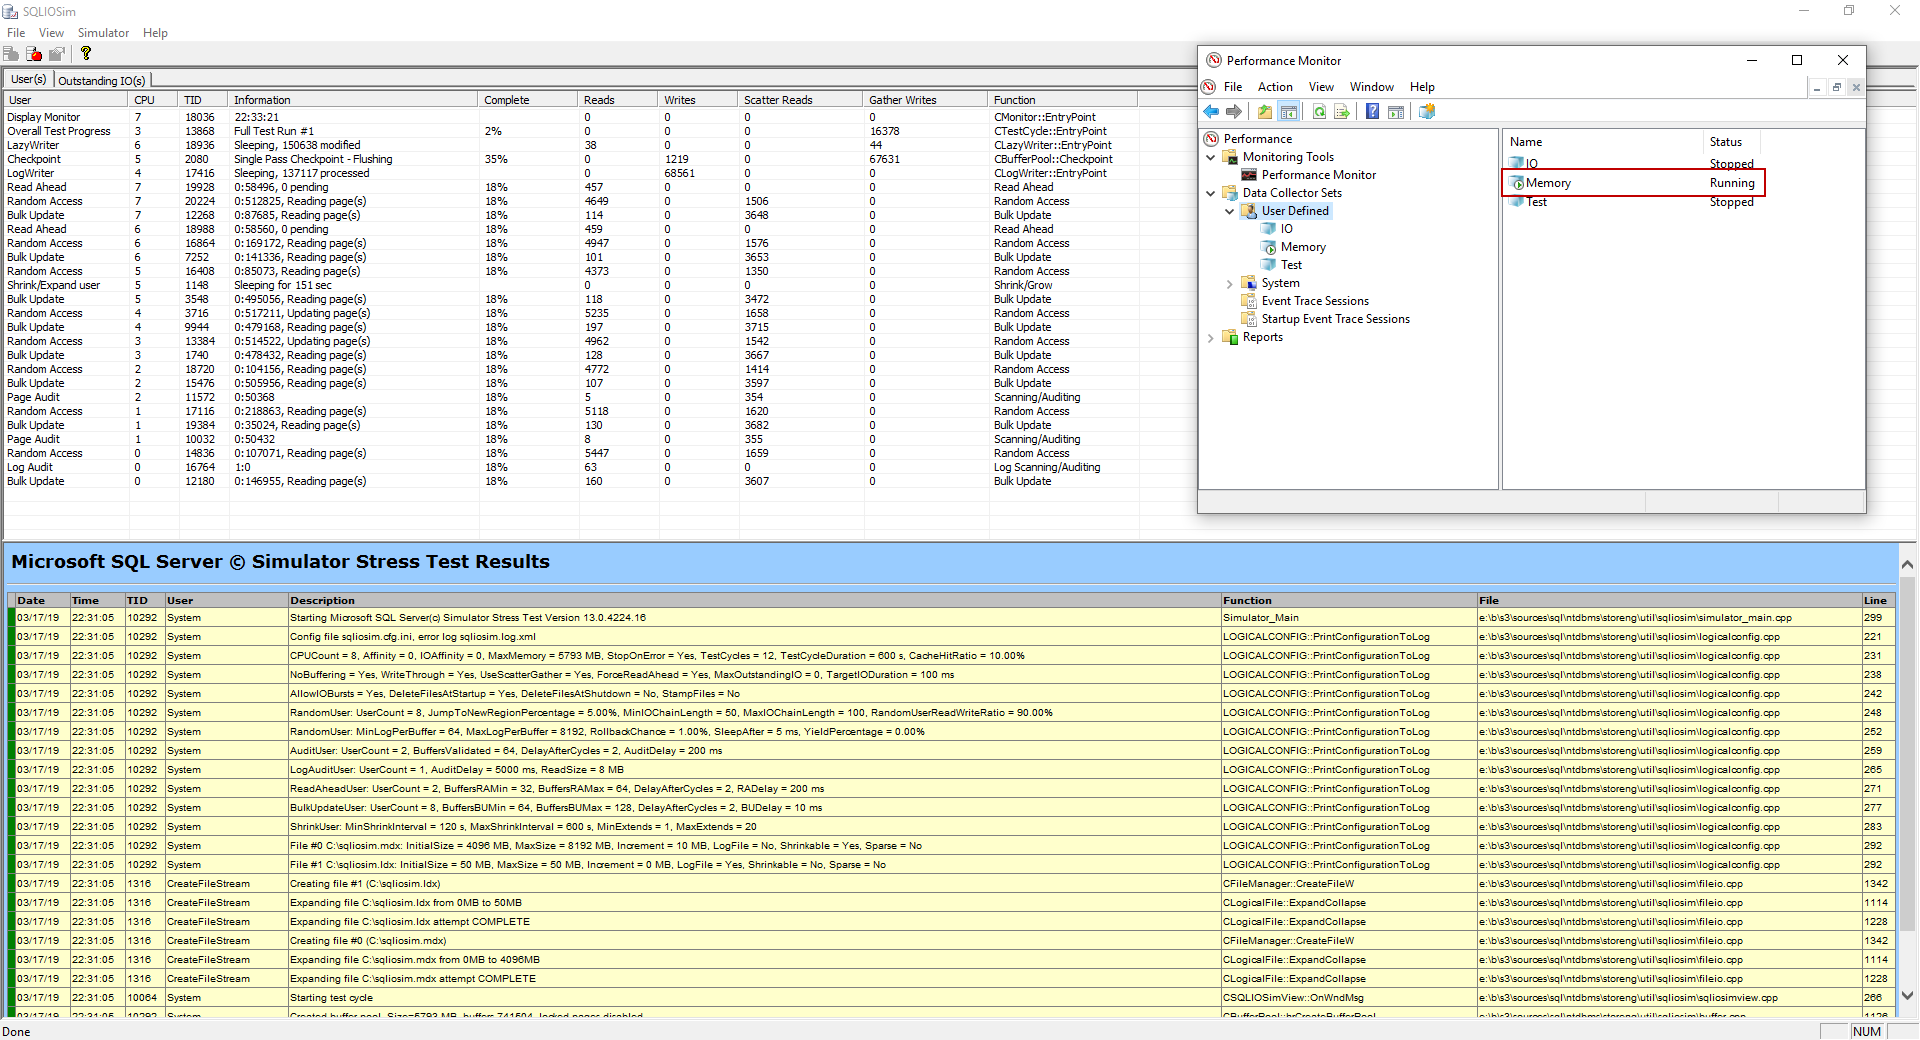 SQL Server monitoring tool for simulating server activity on a disk subsystem